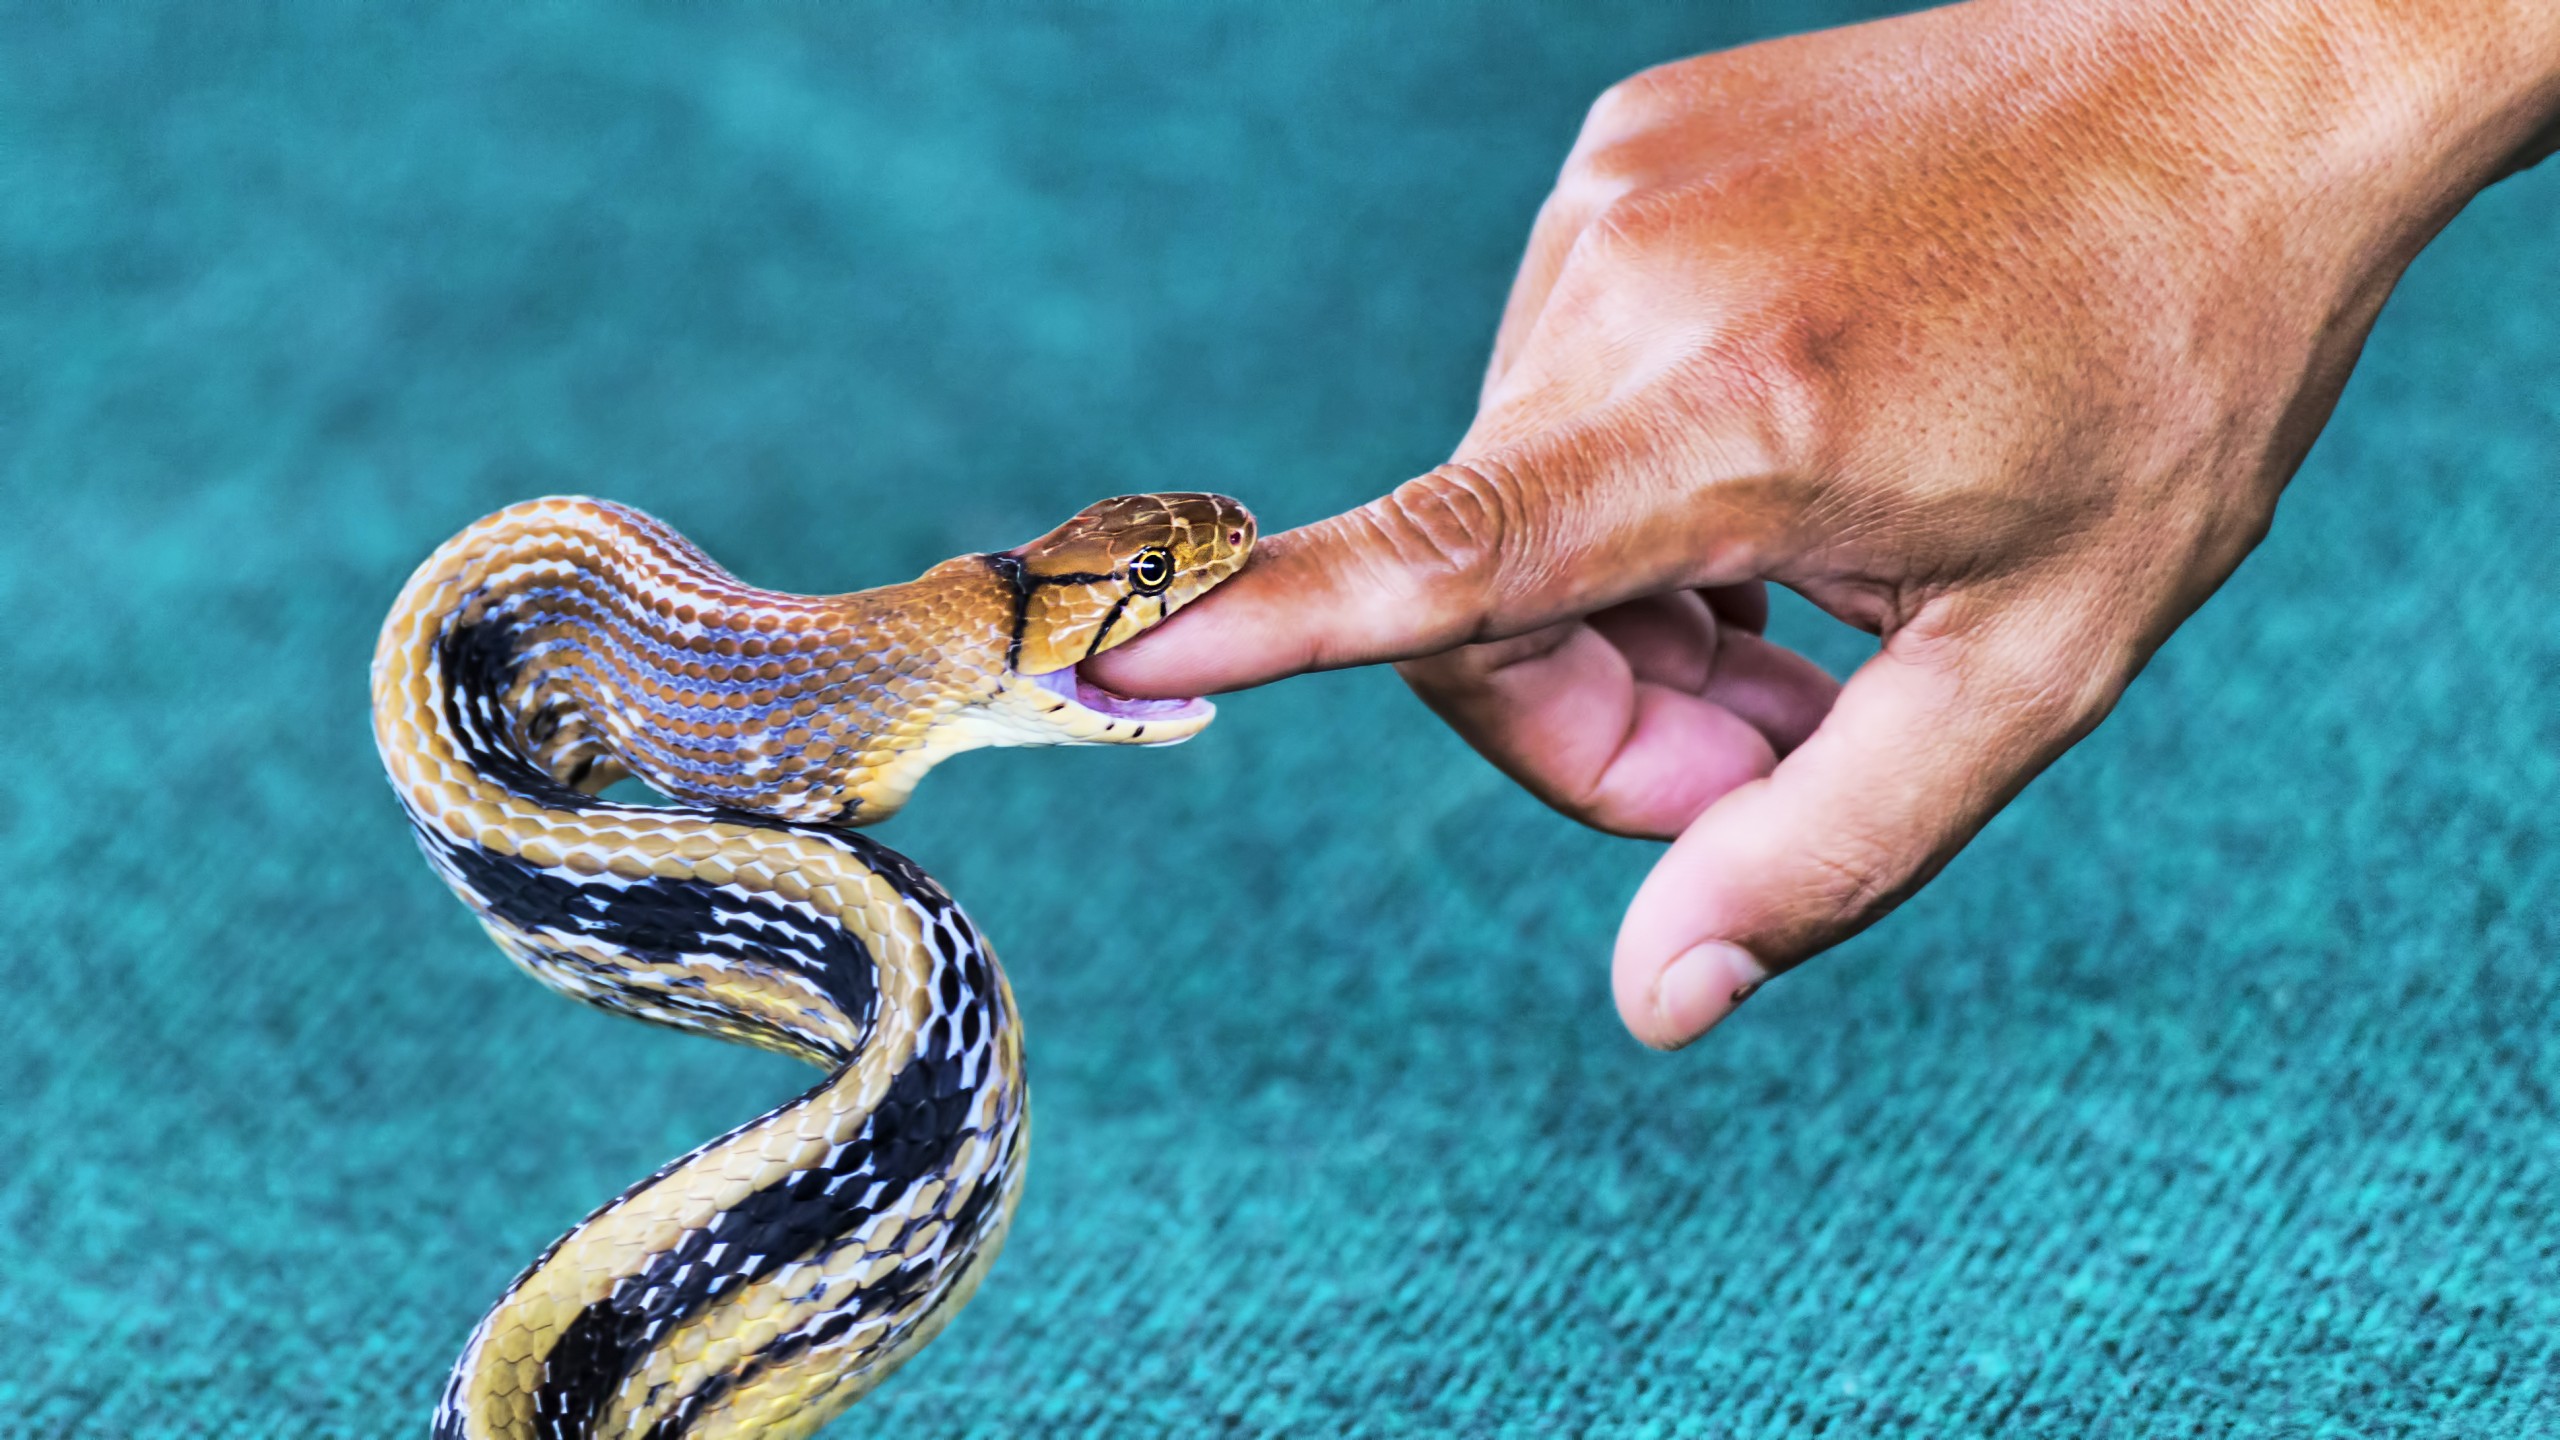 Injuries from Animals, Insects, and Snakes